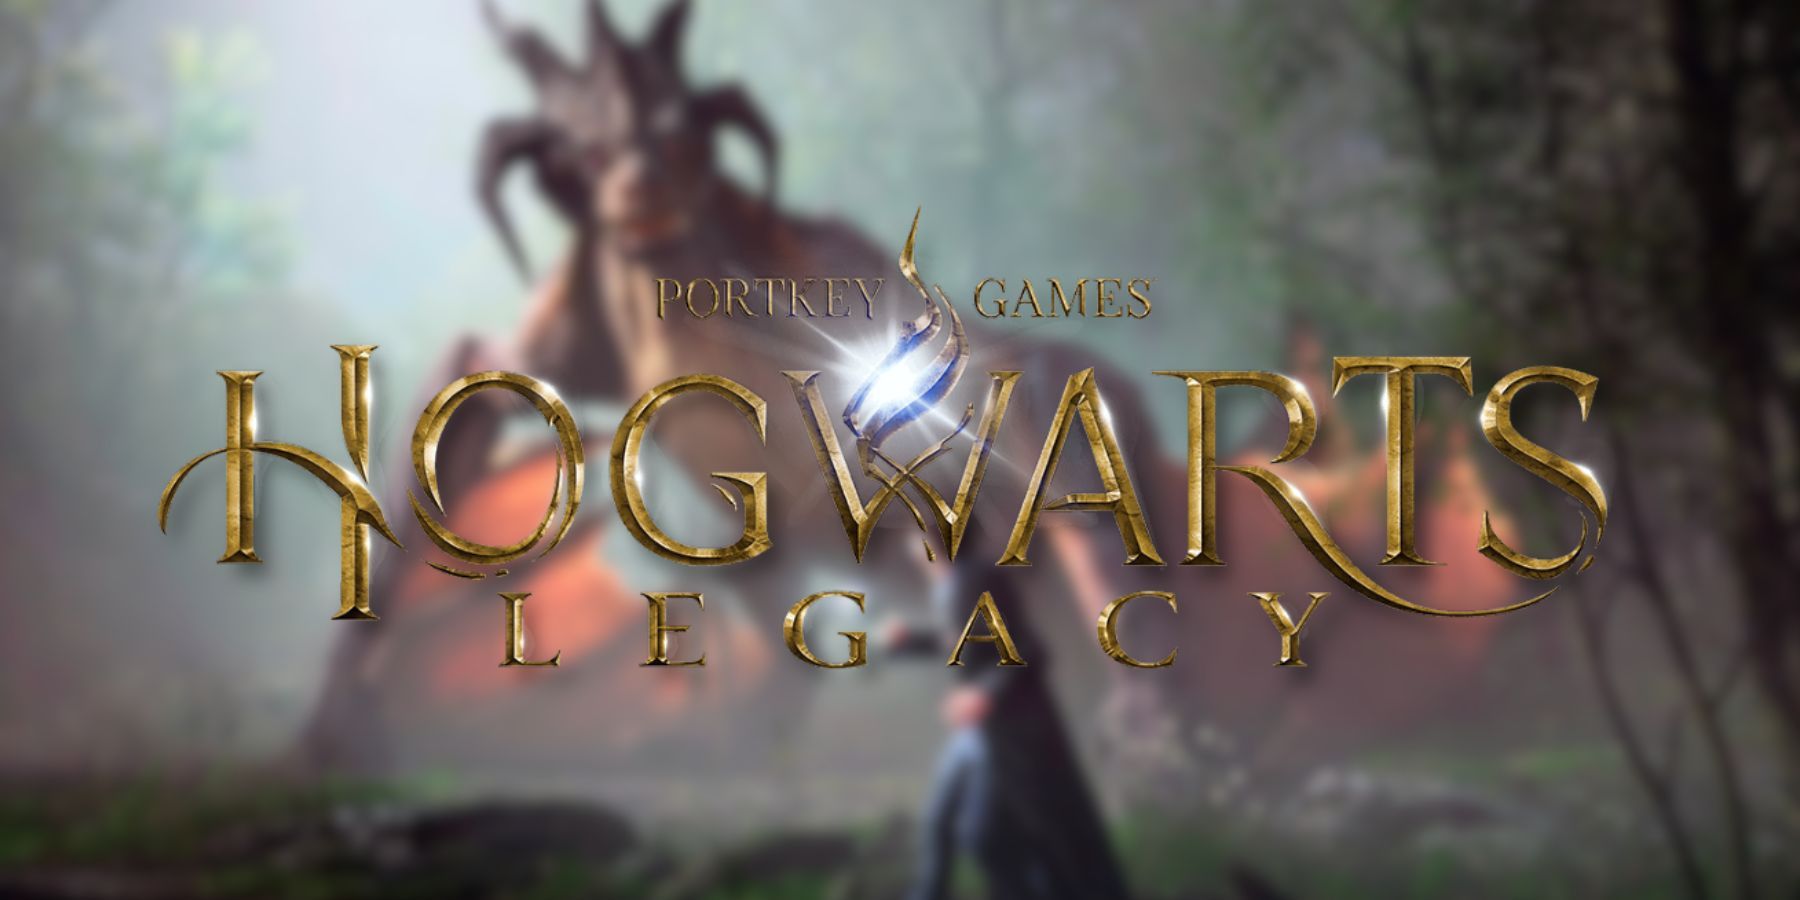 Hogwarts Legacy gameplay captures the magic of the books